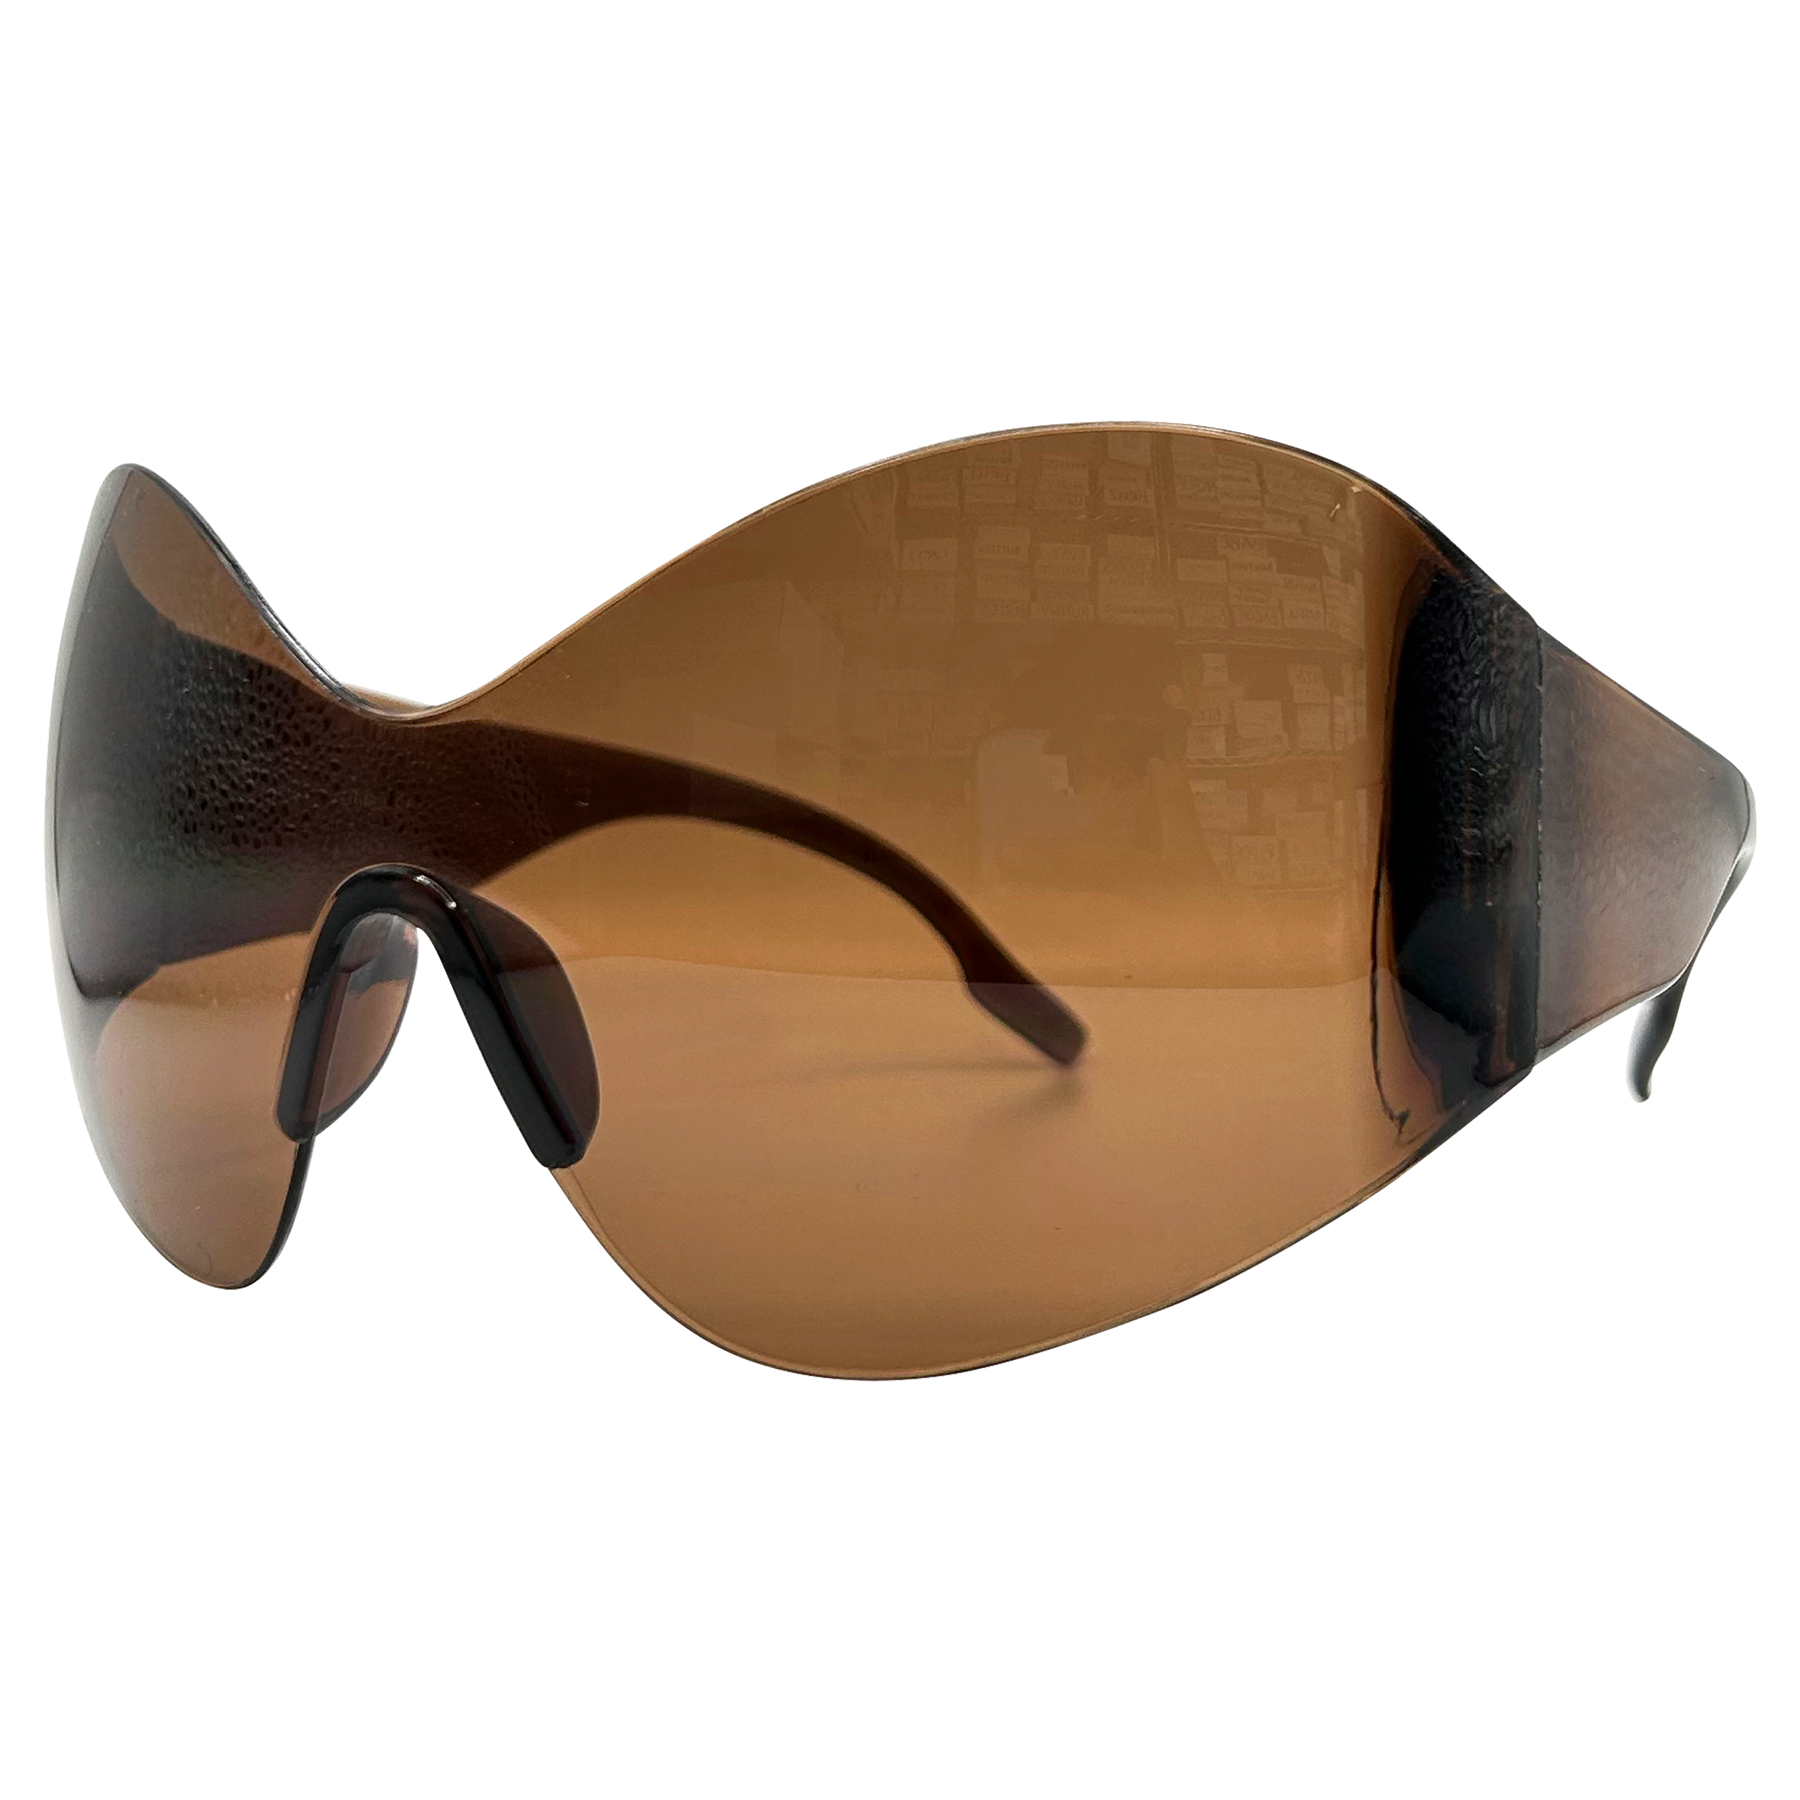 Shop Truth Shield Vintage-Inspired Sunglasses